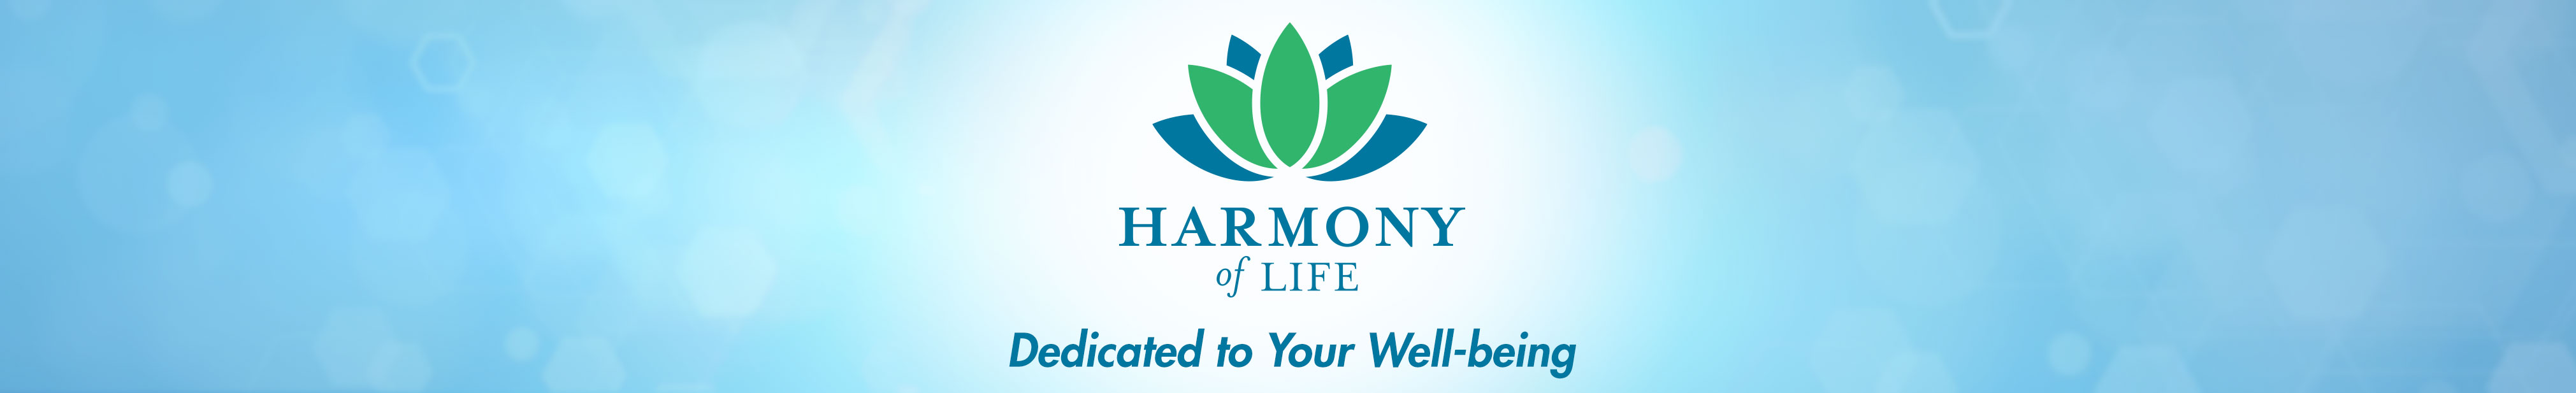 Harmony of Life: Dedicated to Your Well-Being